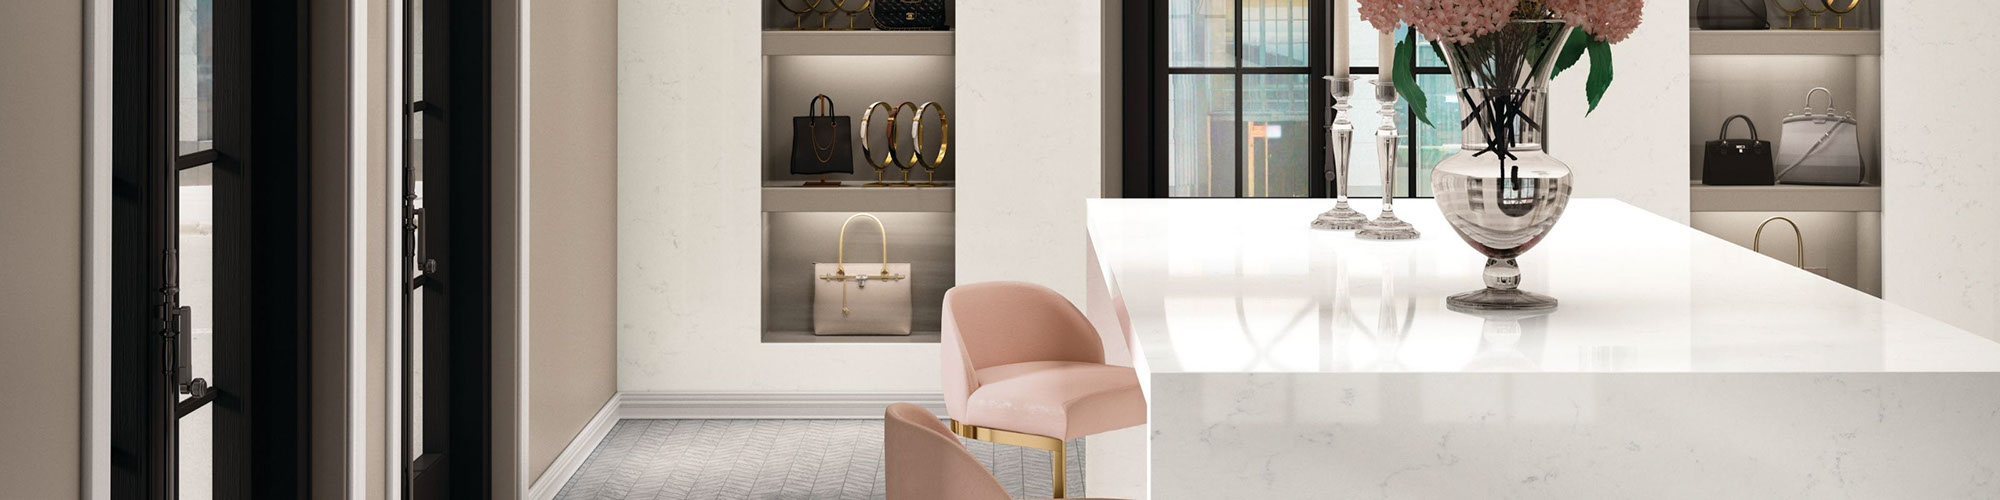 Boutique with white quartz waterfall countertop, pink & brass chairs, gray chevron mosaic floor tile, white quartz seamless wall with open shelves holding handbags.